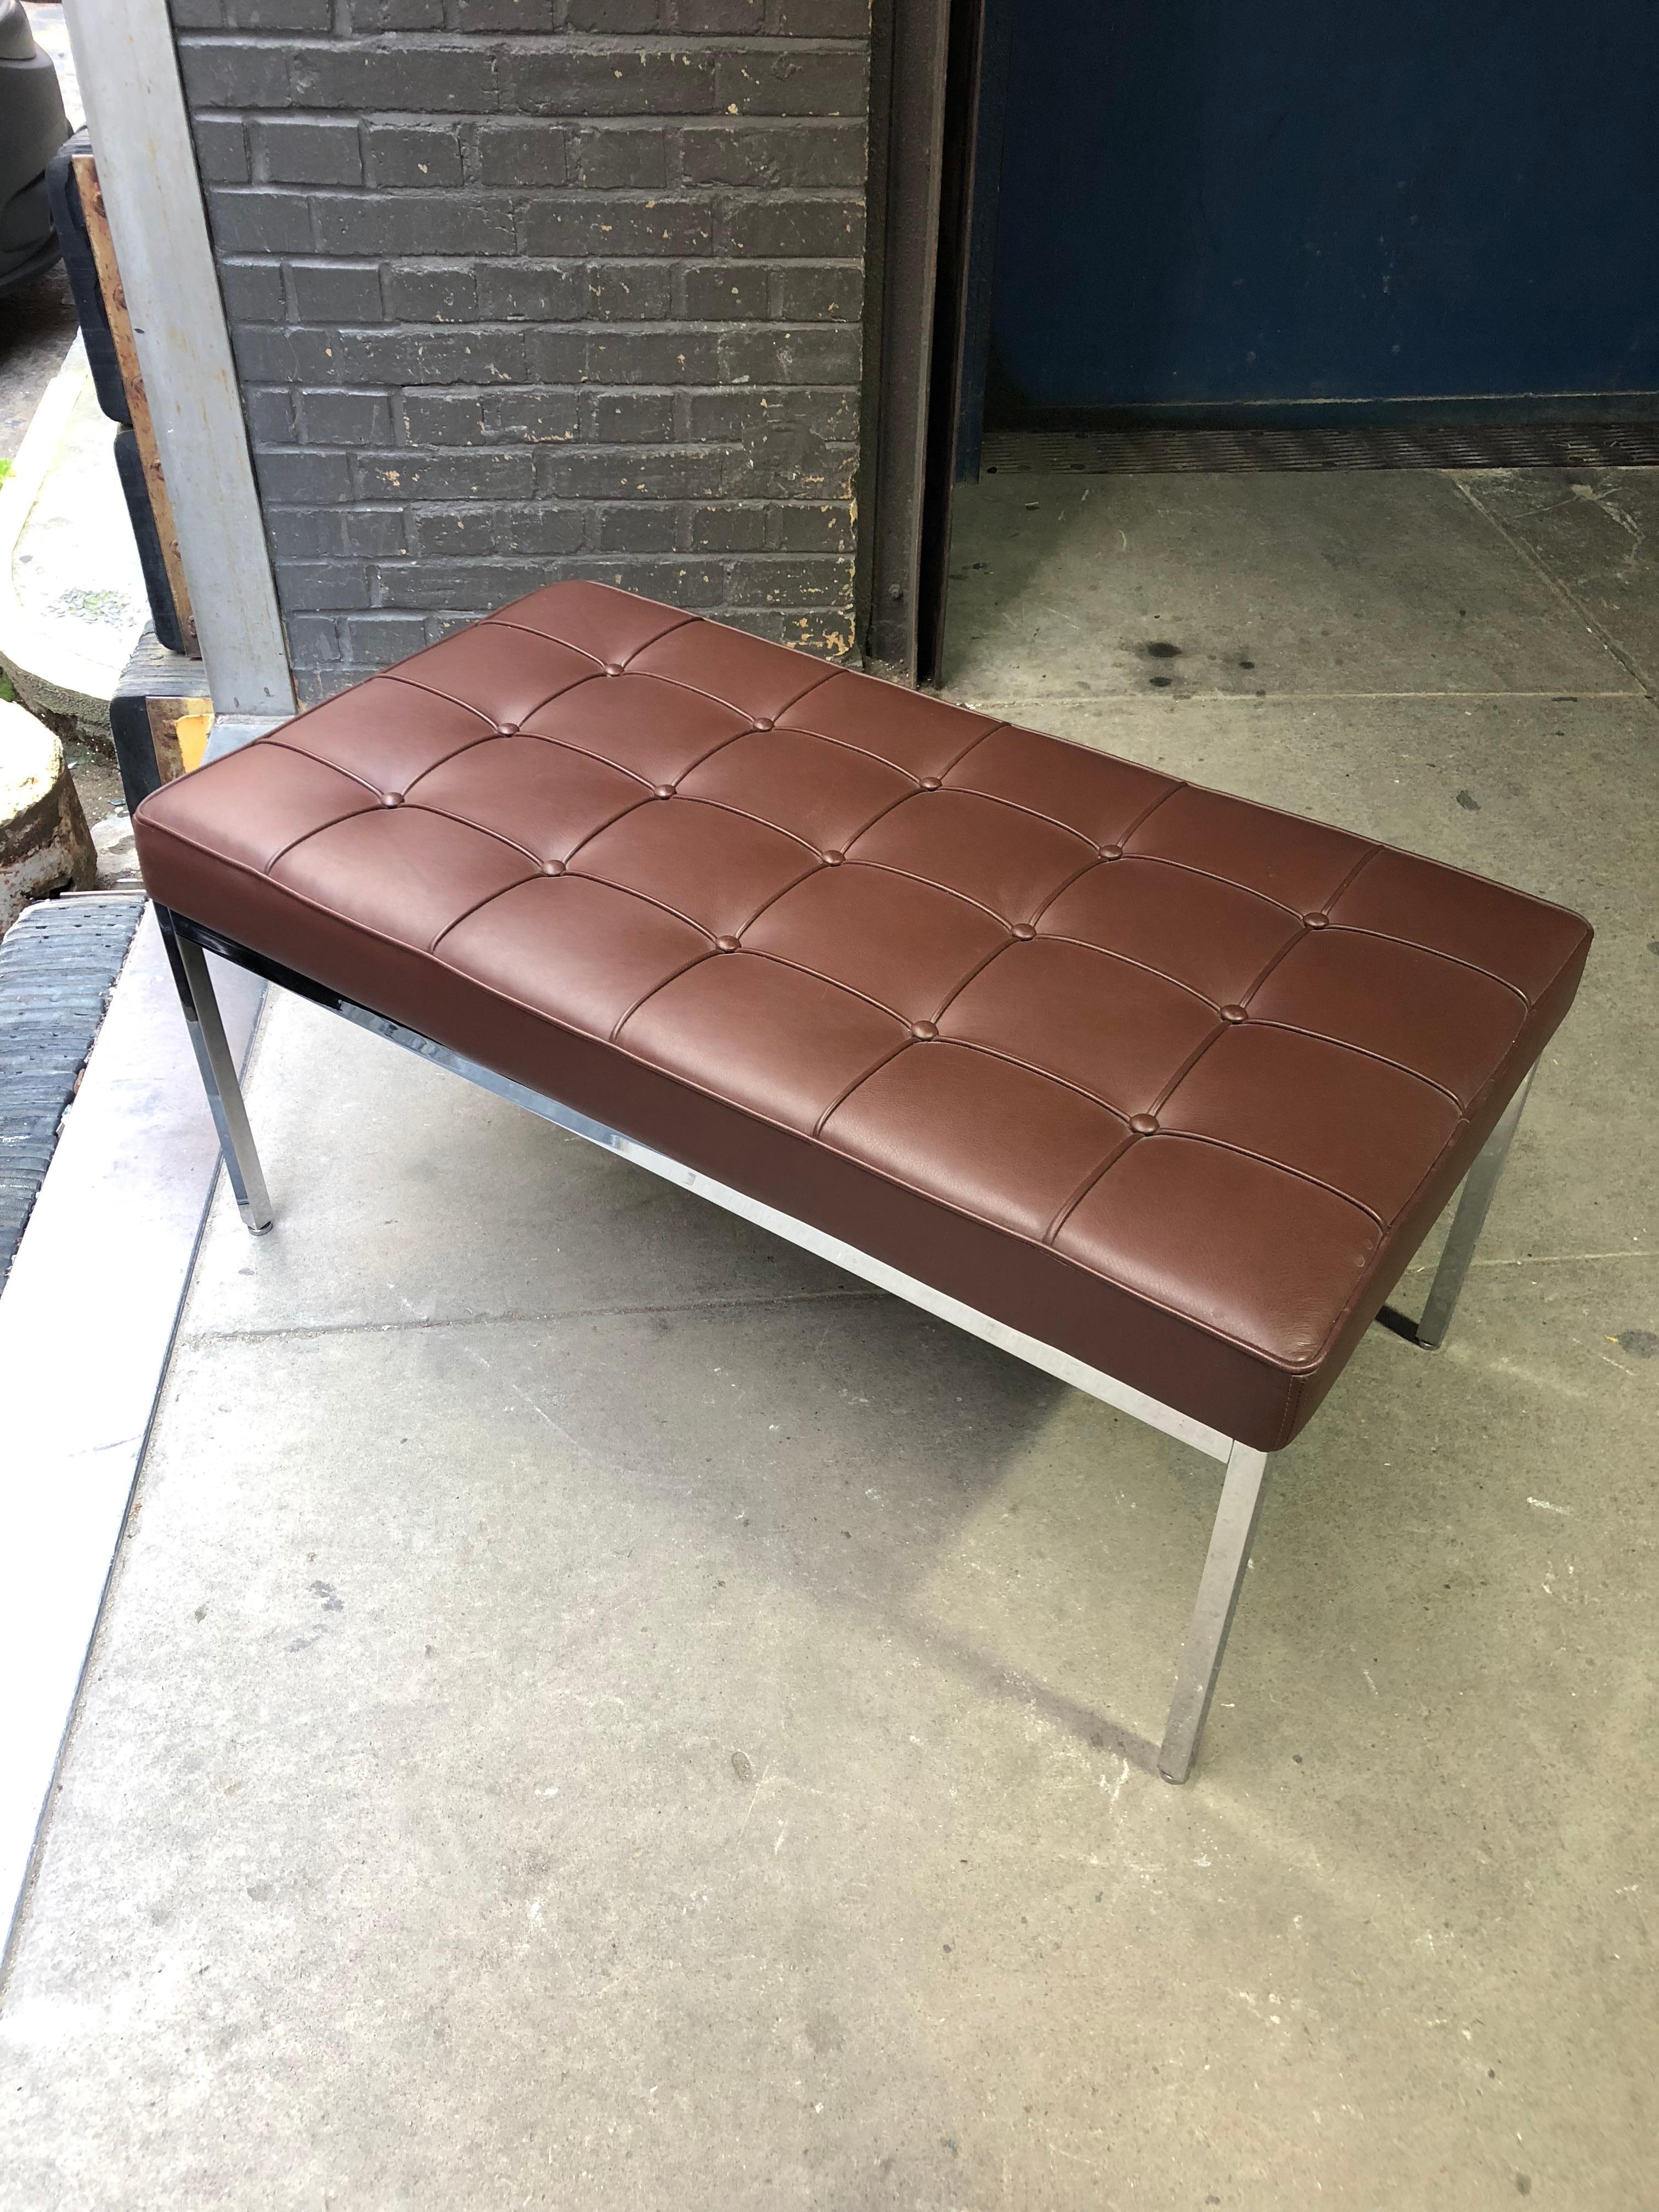 Florence Knoll Tufted Brown Leather and Chrome Bench, Mfg. Knoll 2